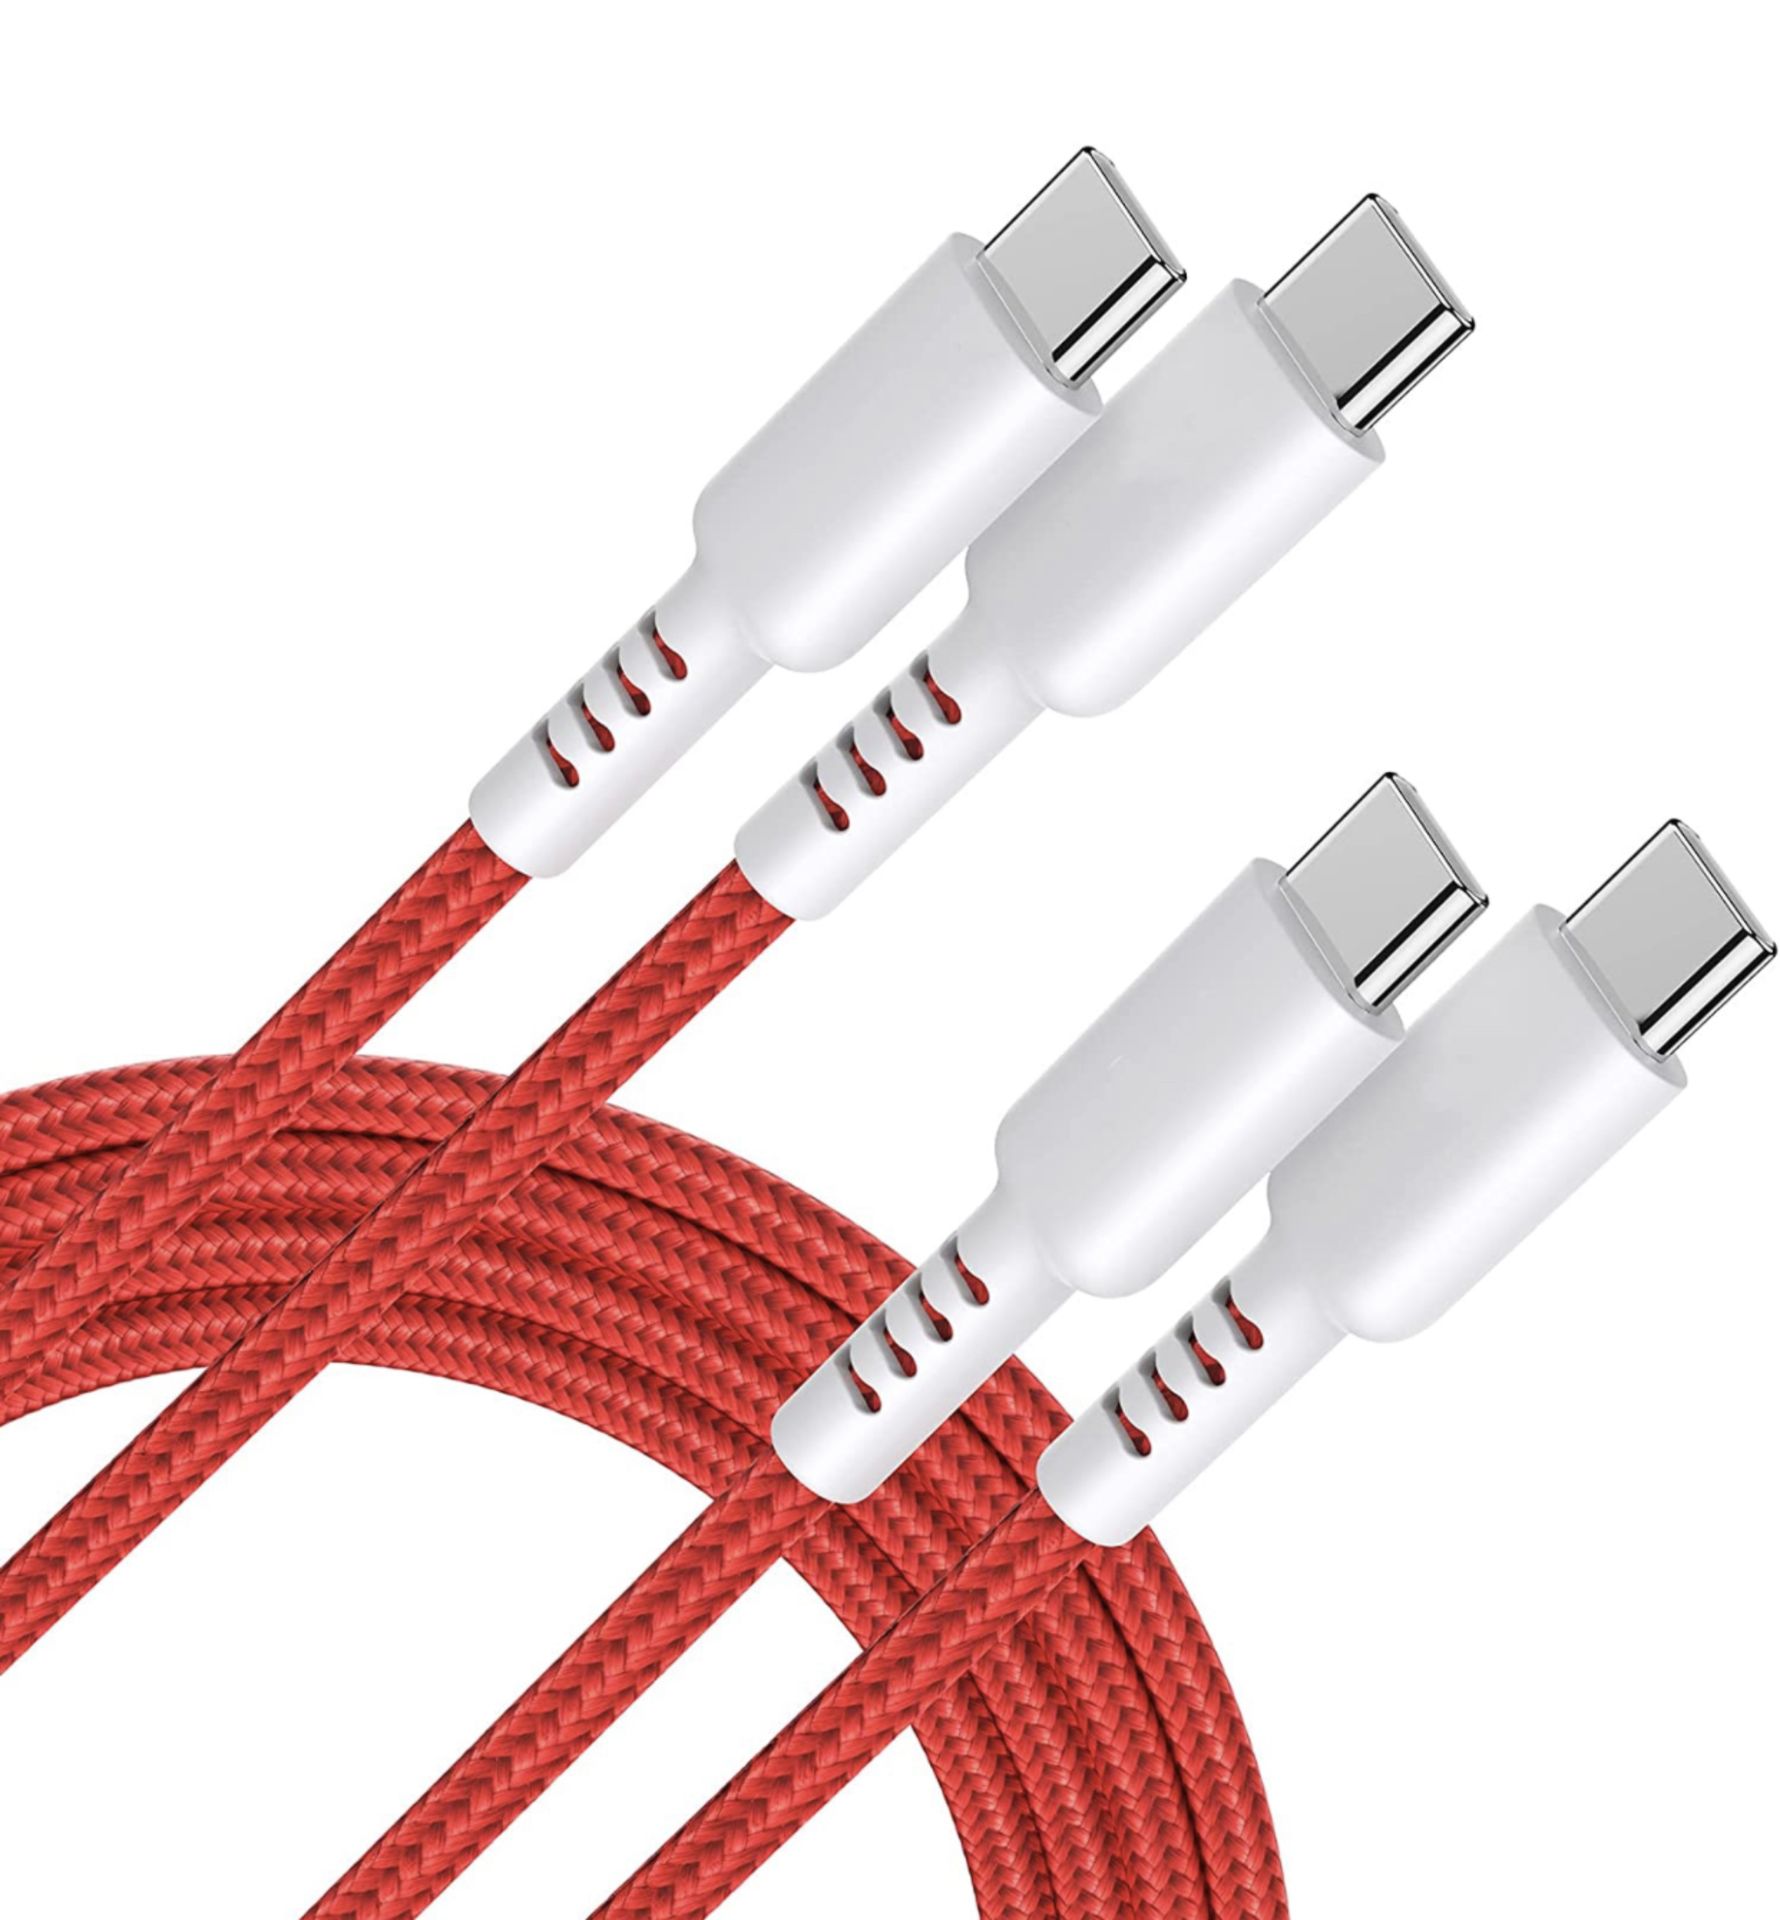 RRP £74 Collection of PC Cables, 6 x Eono 1.8m Audio Optical Cables and 4 x Eono USB C to C Cables - Image 2 of 2